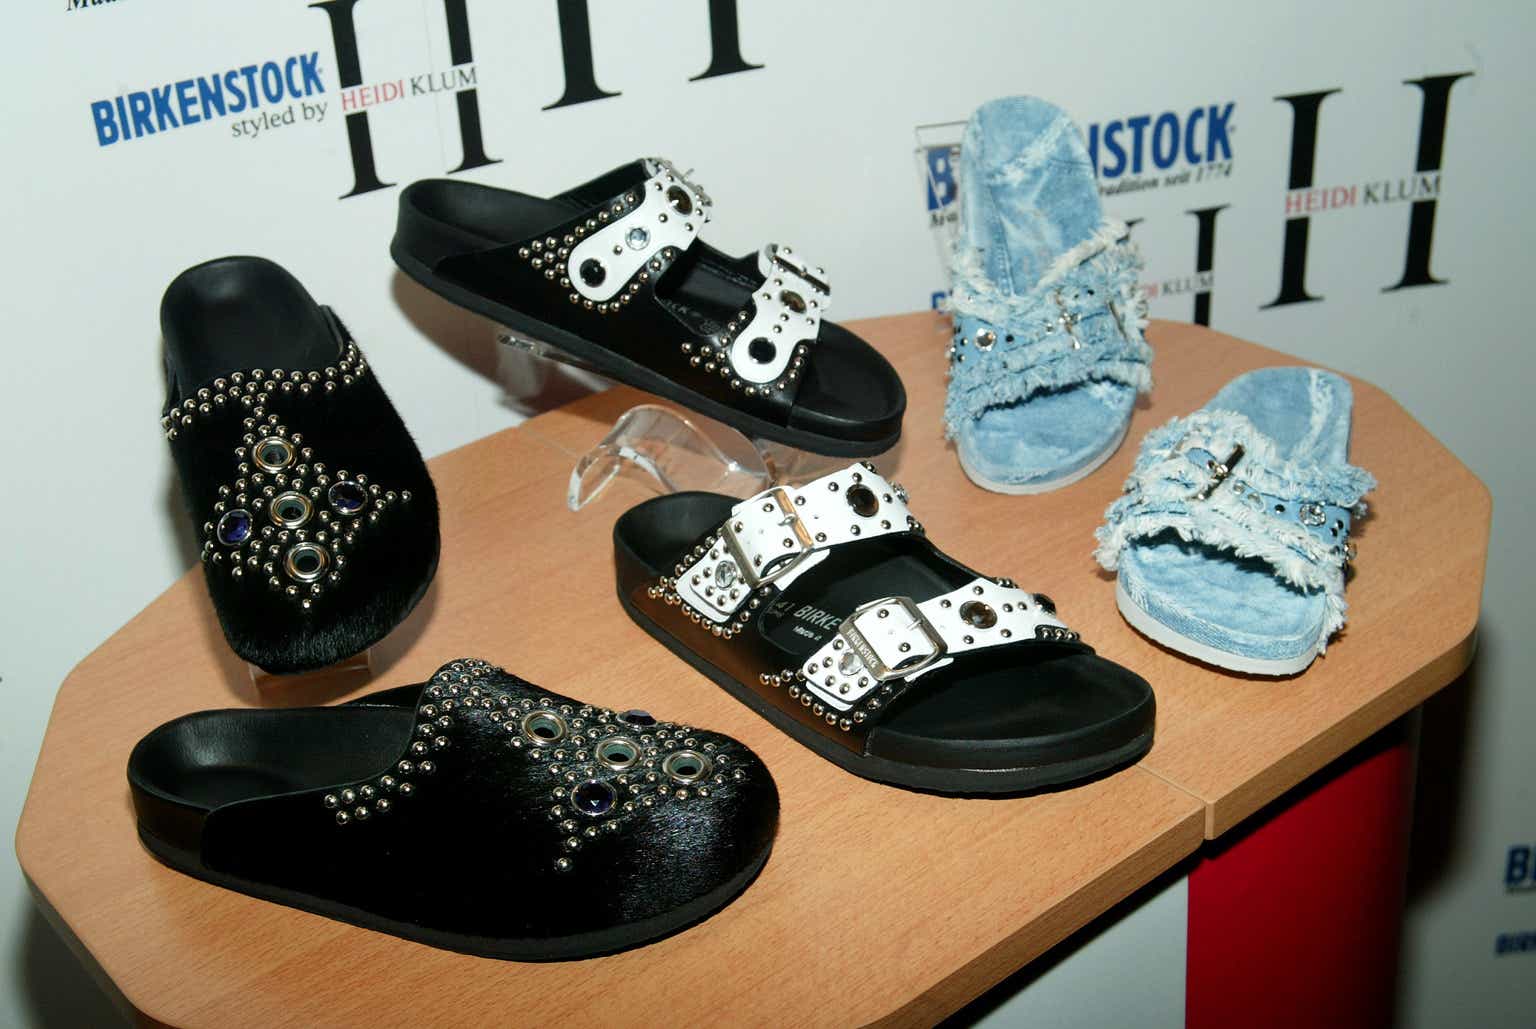 Birkenstock files for IPO two years after its $4.3 billion acquisition